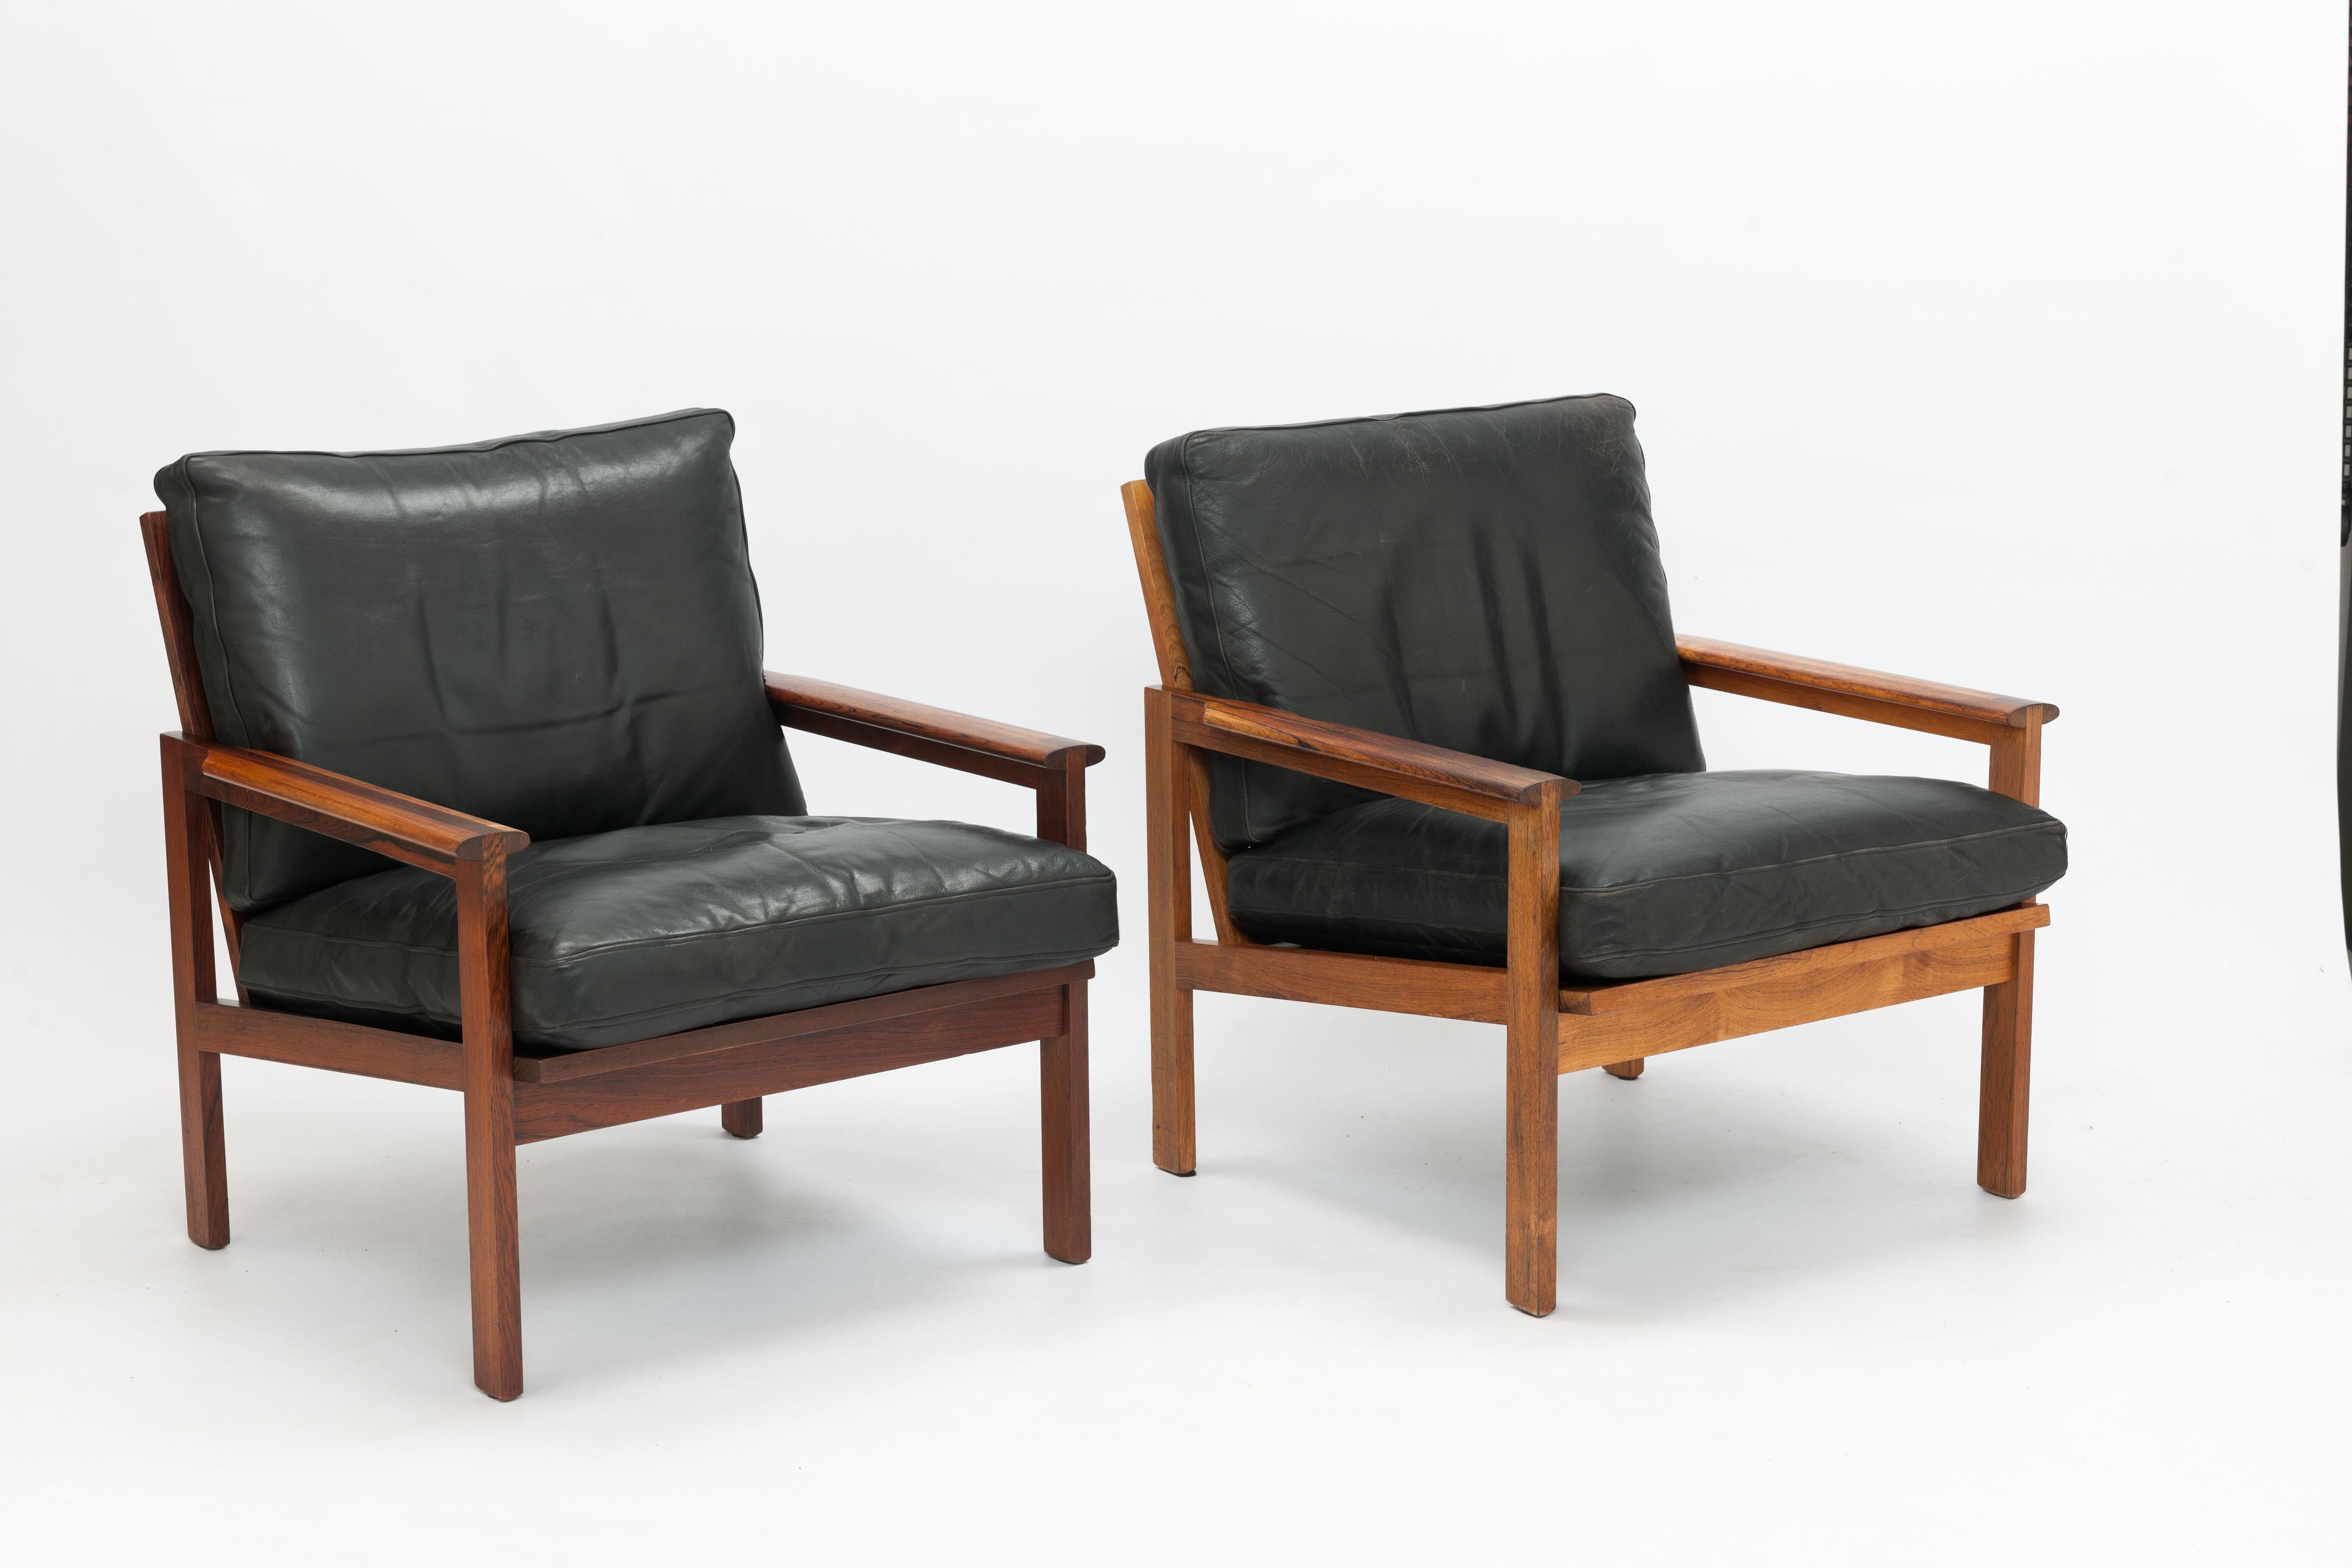 Rosewood & Black Leather Capella Arm Chair by Illum Wikkelsø, Pair Available 4